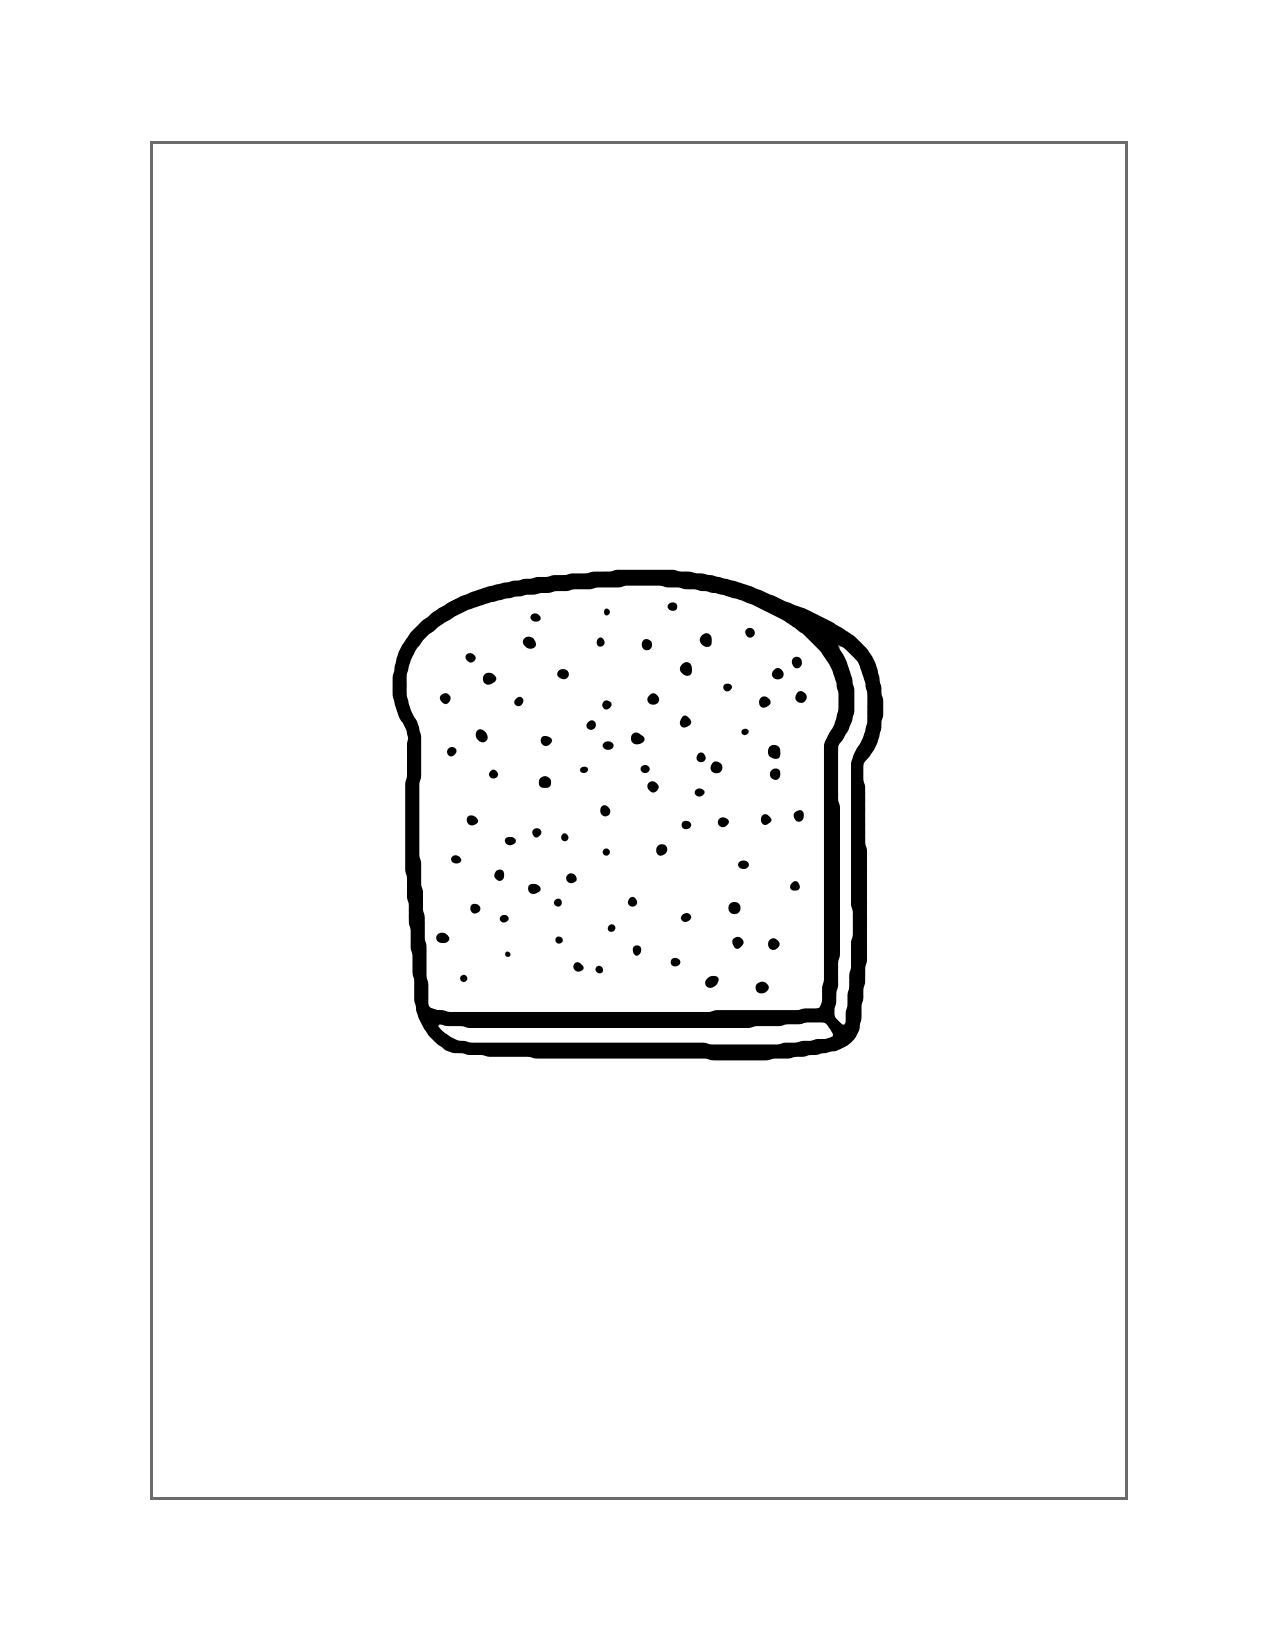 Slice Of Bread Coloring Page